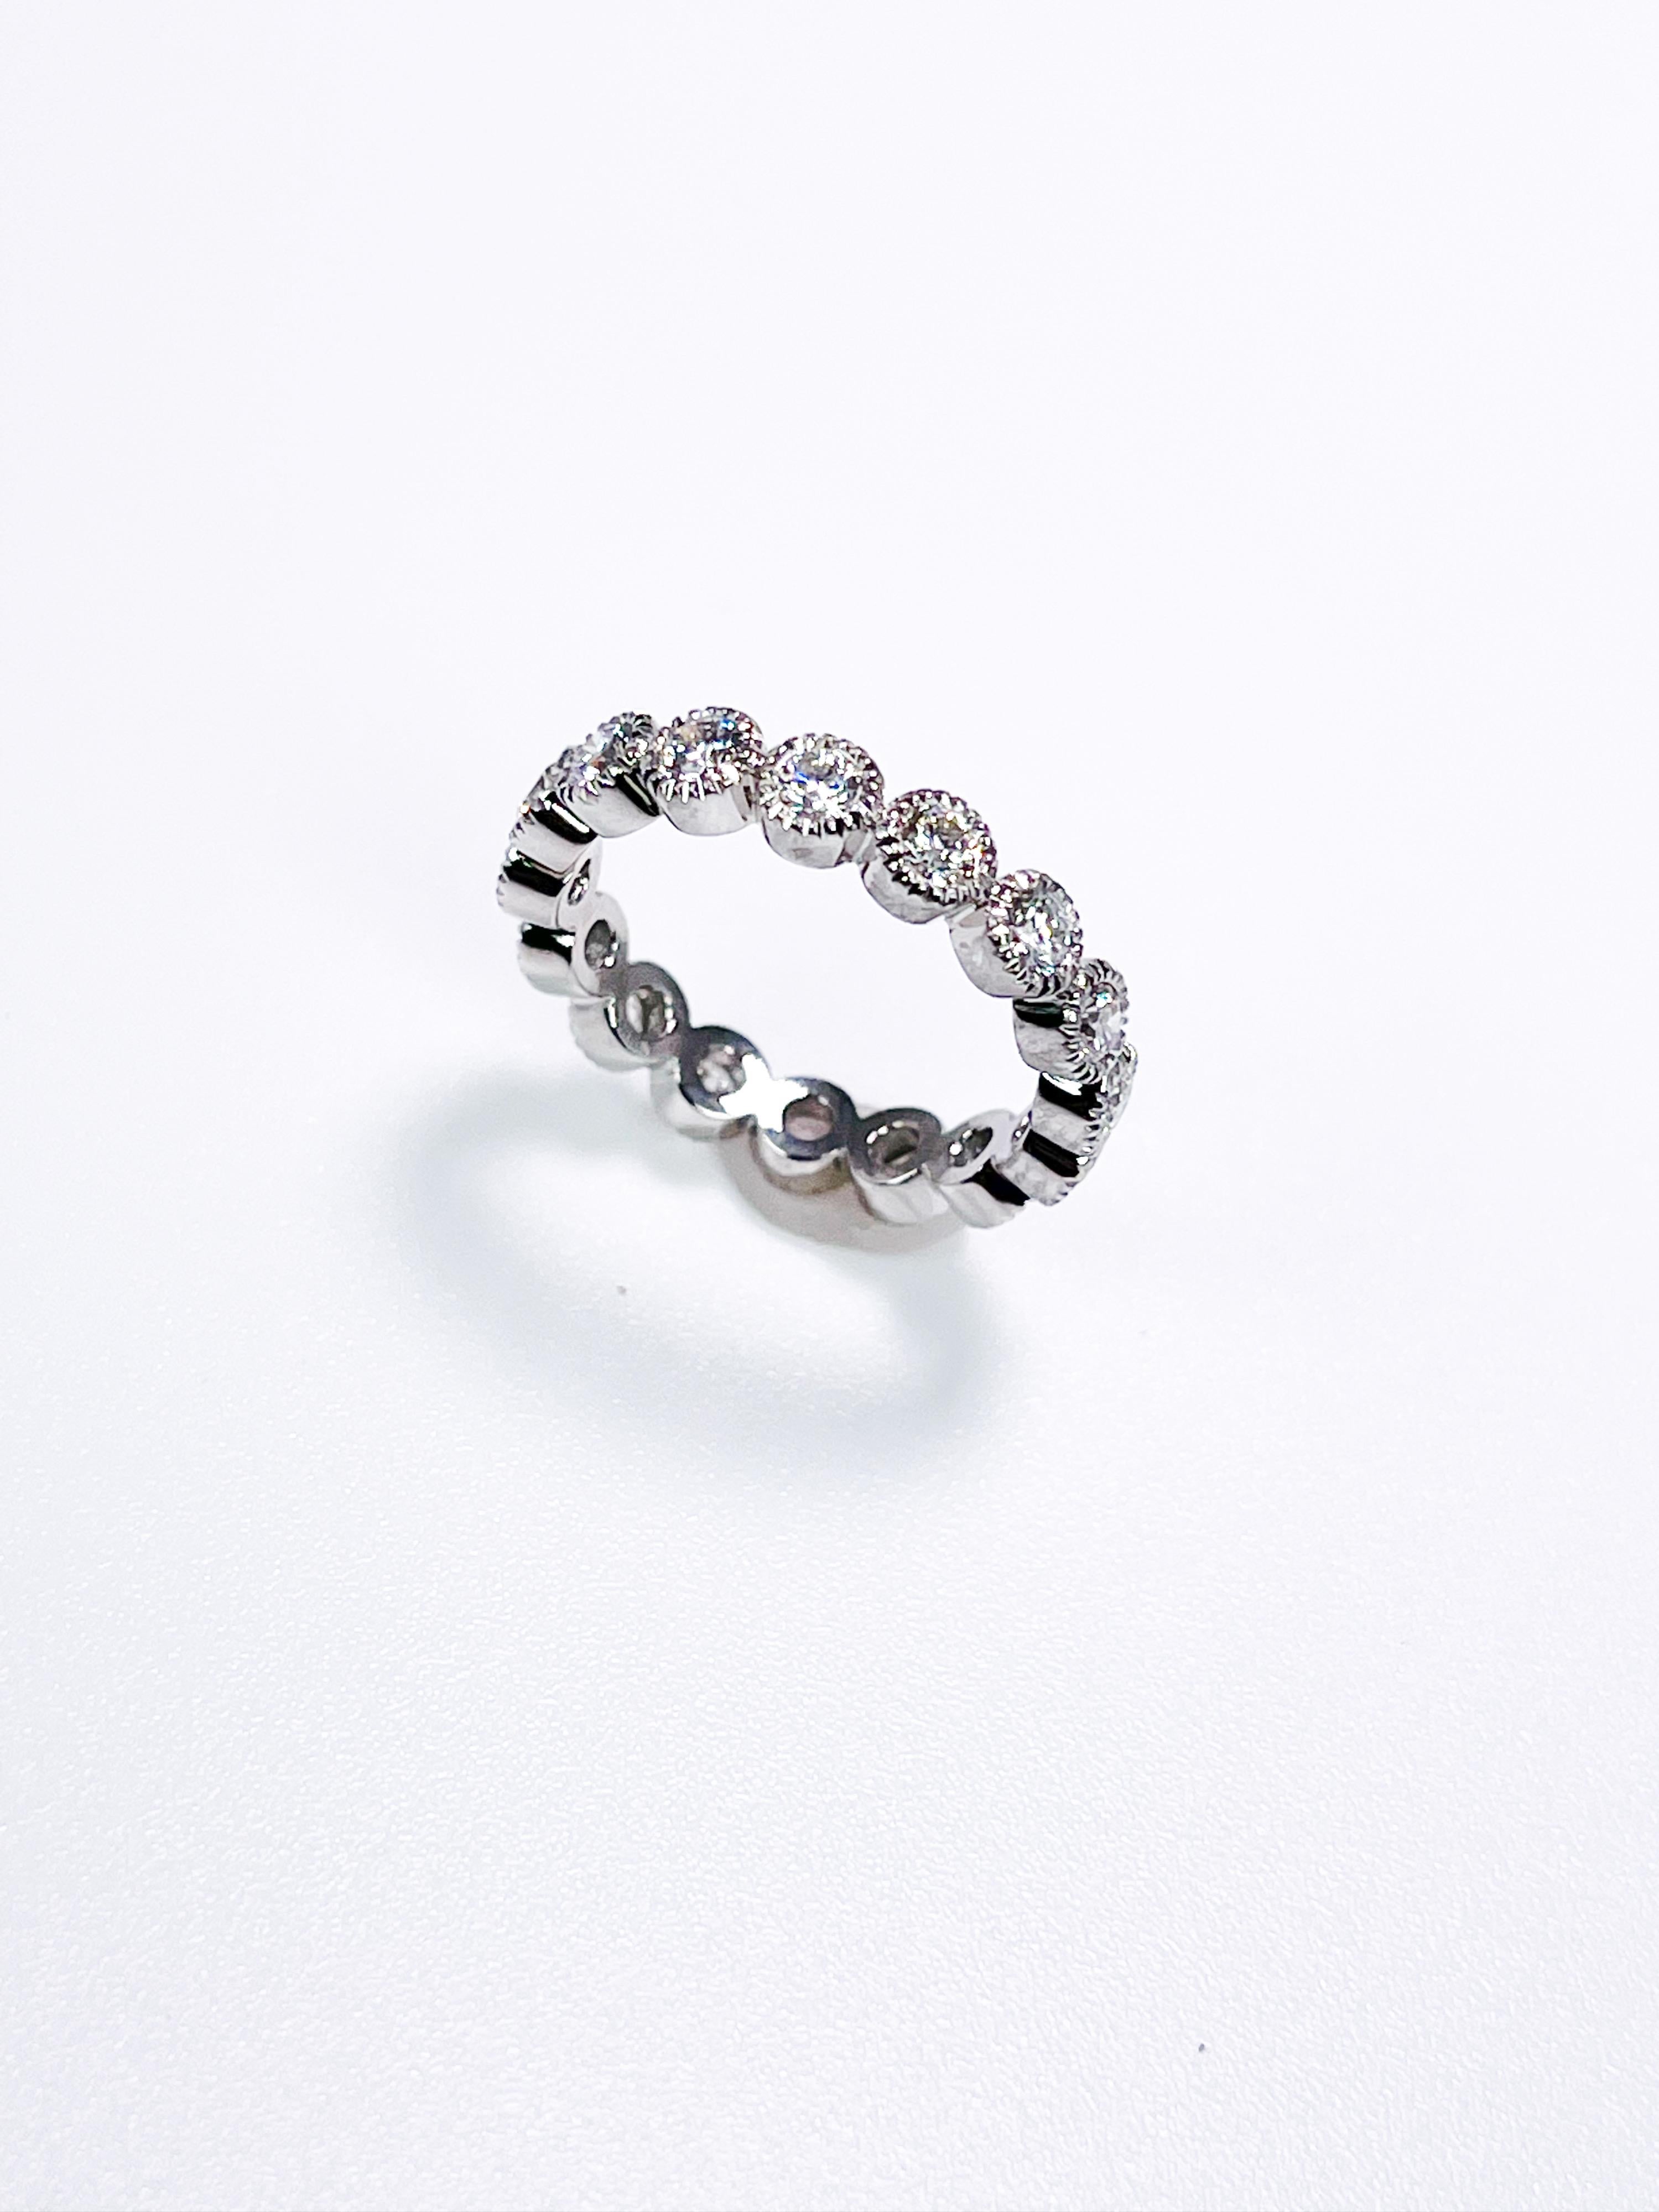 Modern Round Eternity Ring Hand Engraved Made in Platinum 1ct For Sale